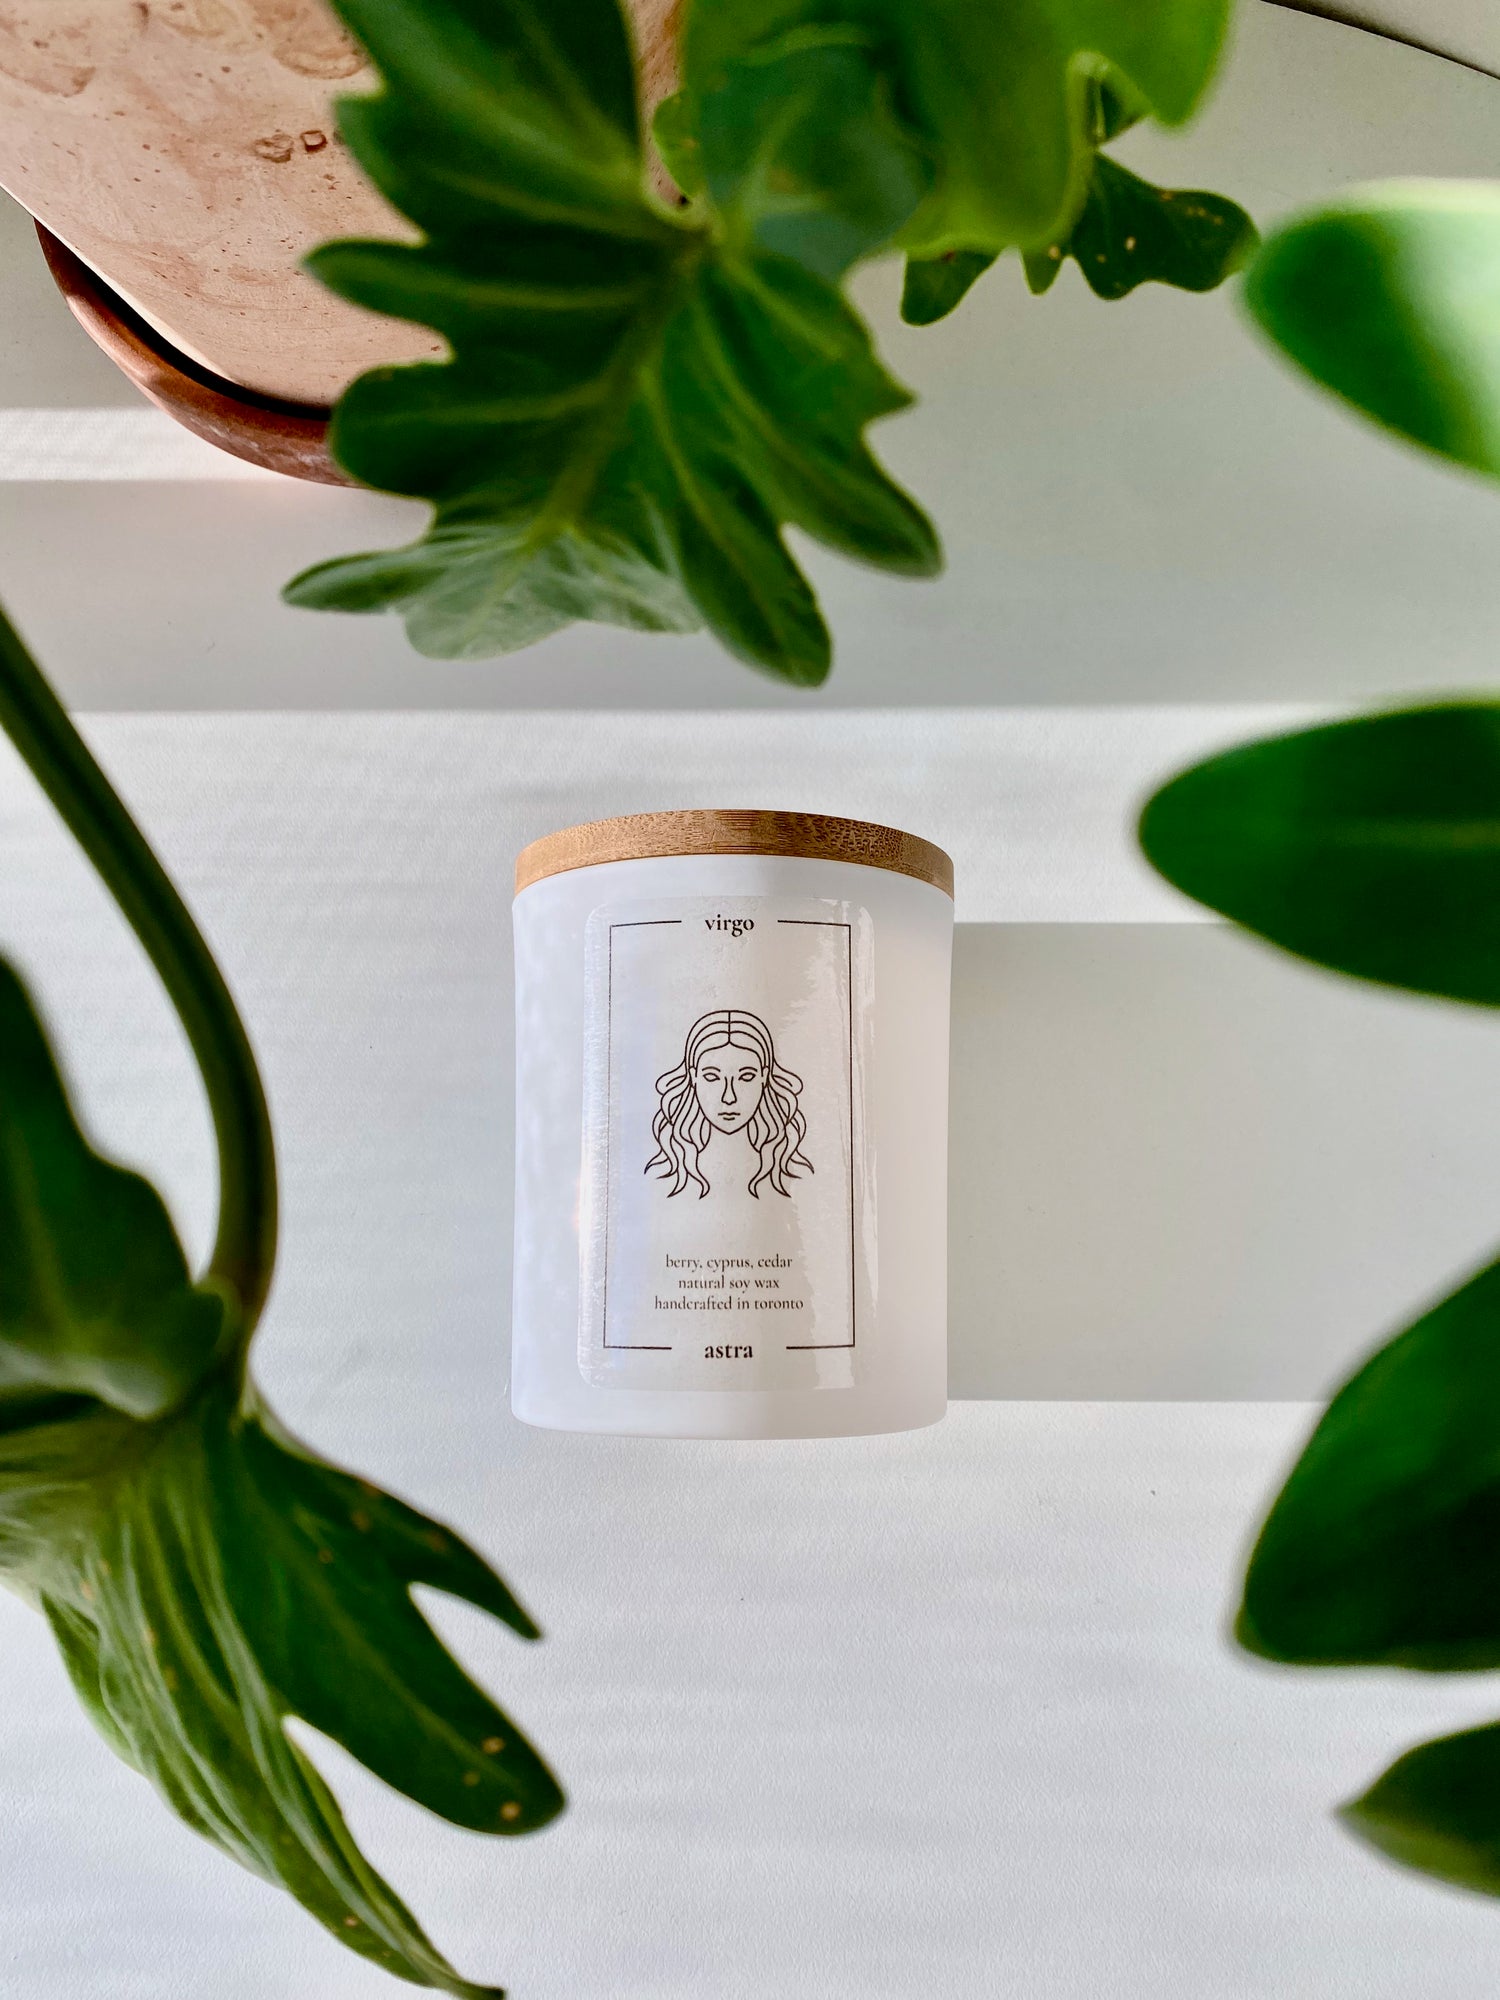 A Virgo candle; photo is bordered by green plant leaves